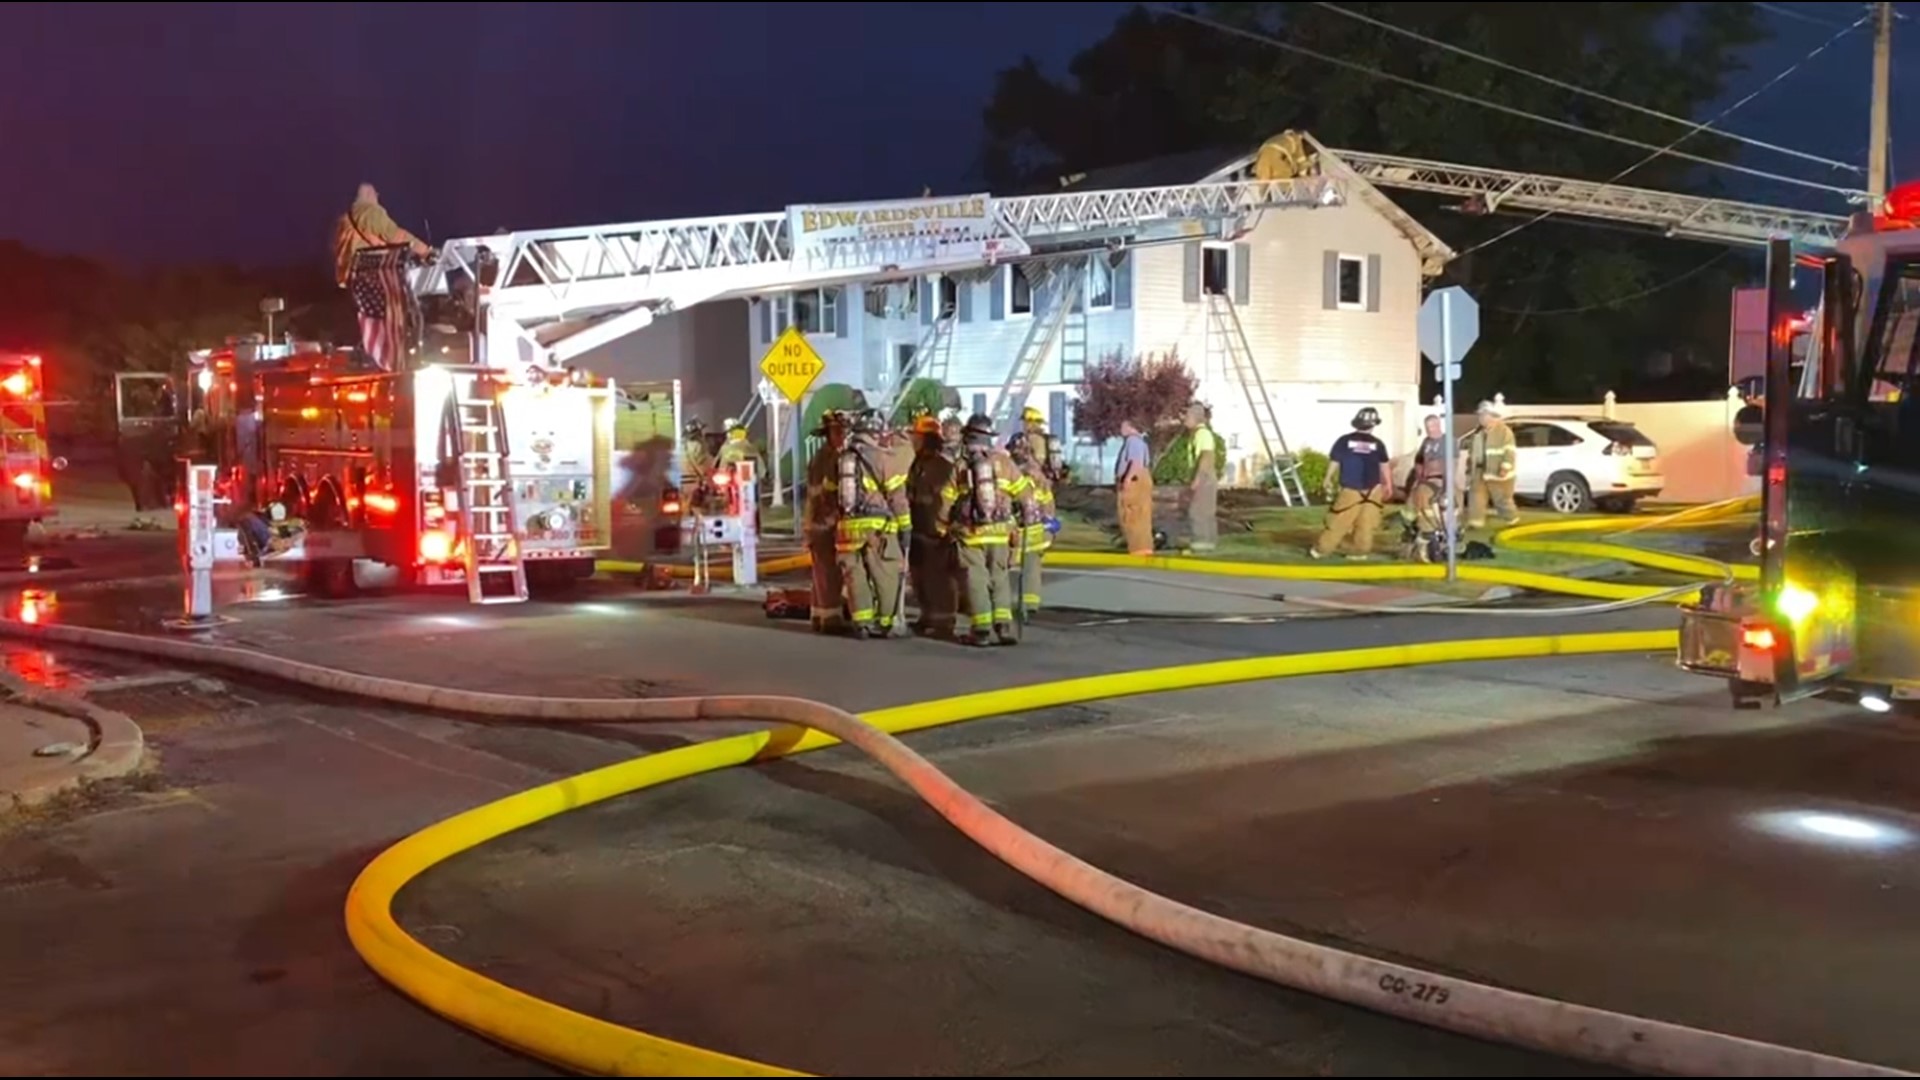 Flames broke out around 8 p.m. Saturday night along Birch Drive in Swoyersville.